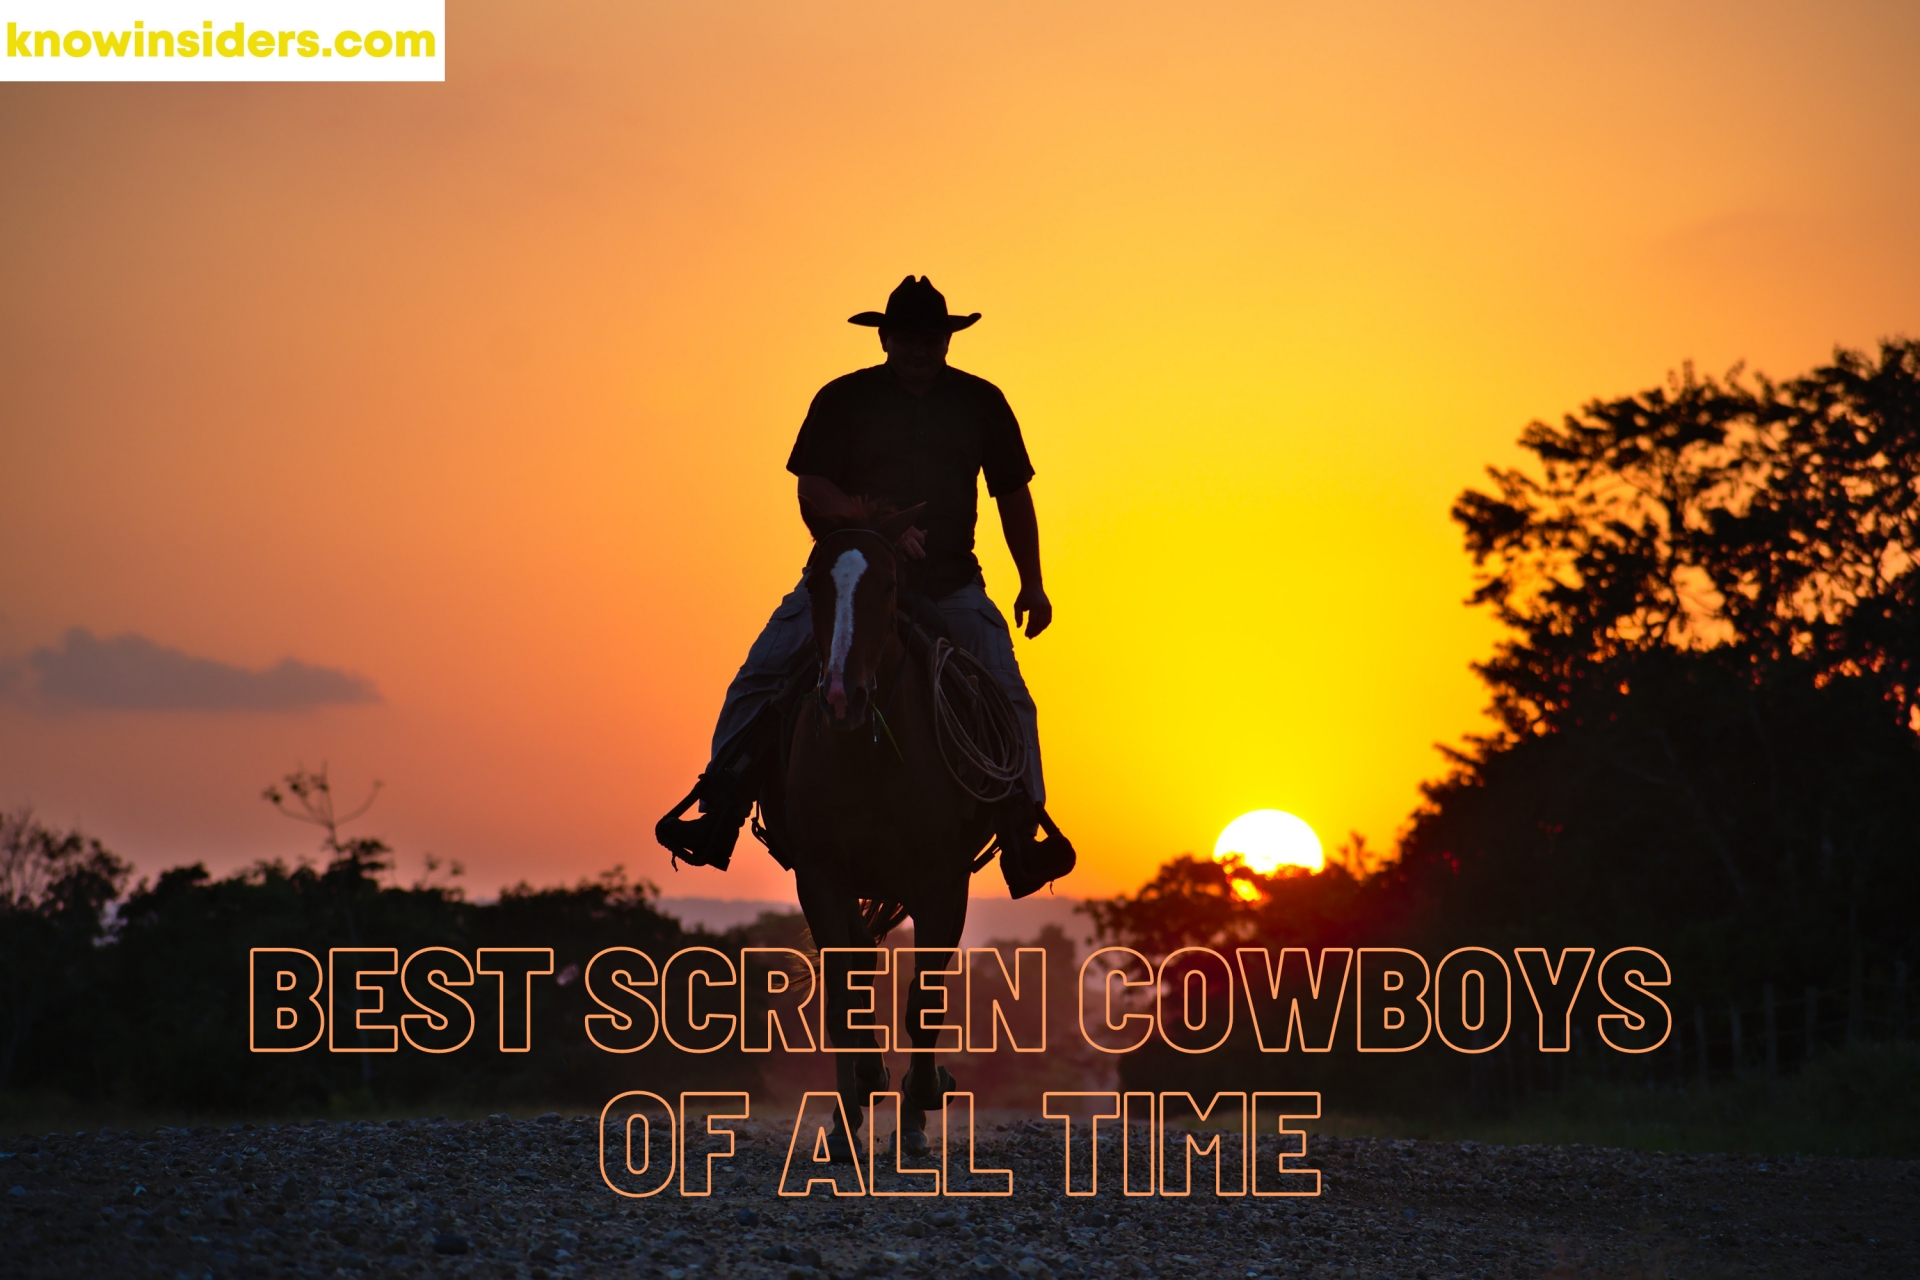 Who Are The Hottest Cowboys In Movie of All Time - Top 10